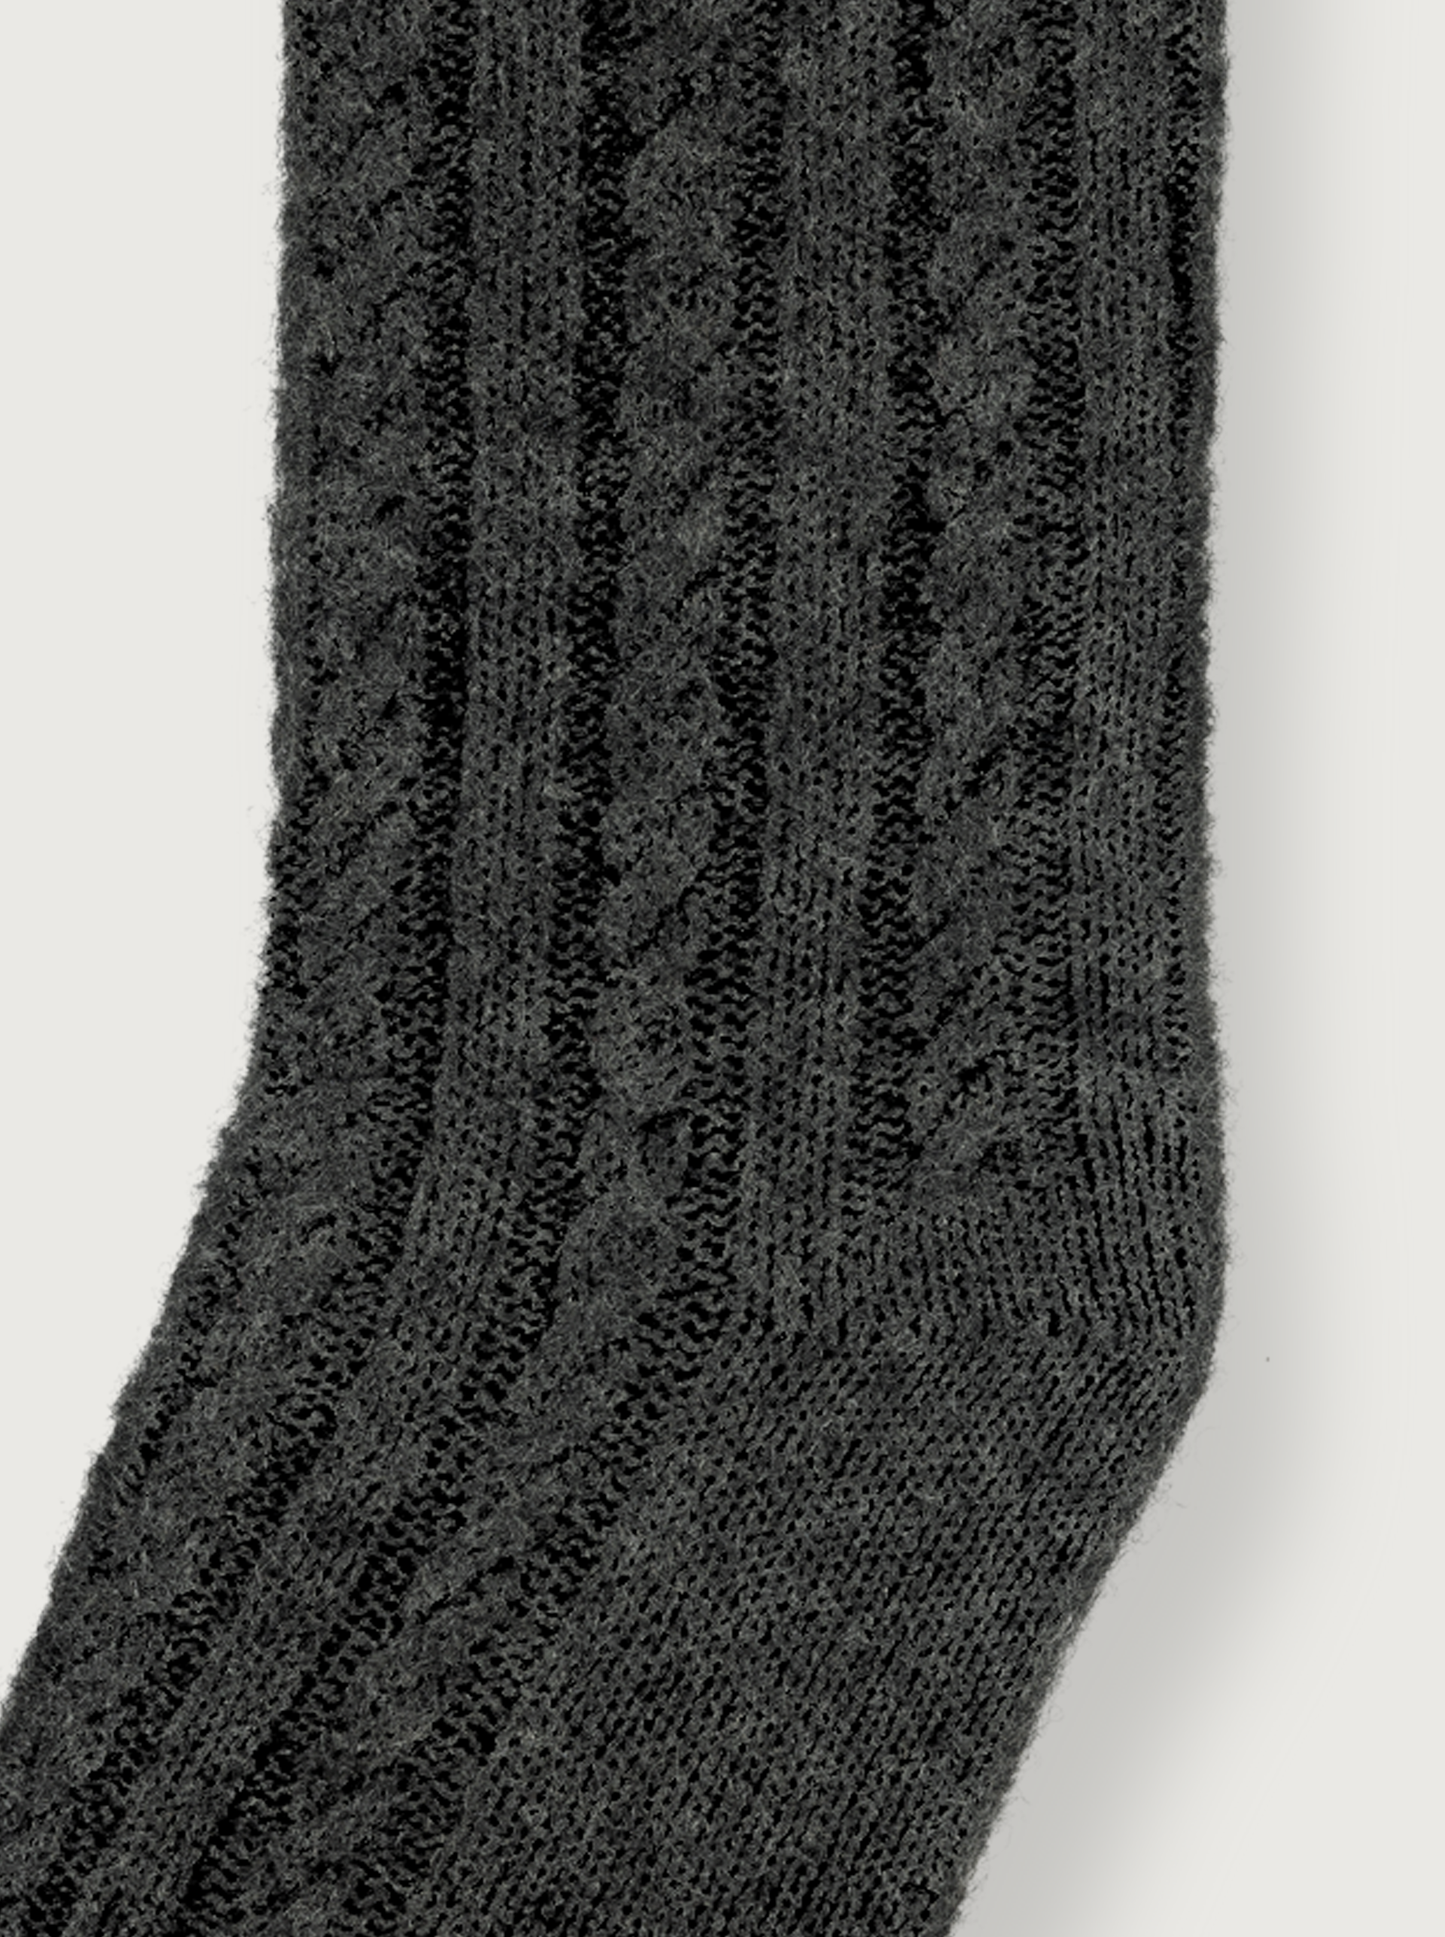 wool and cashmere socks in dark gray